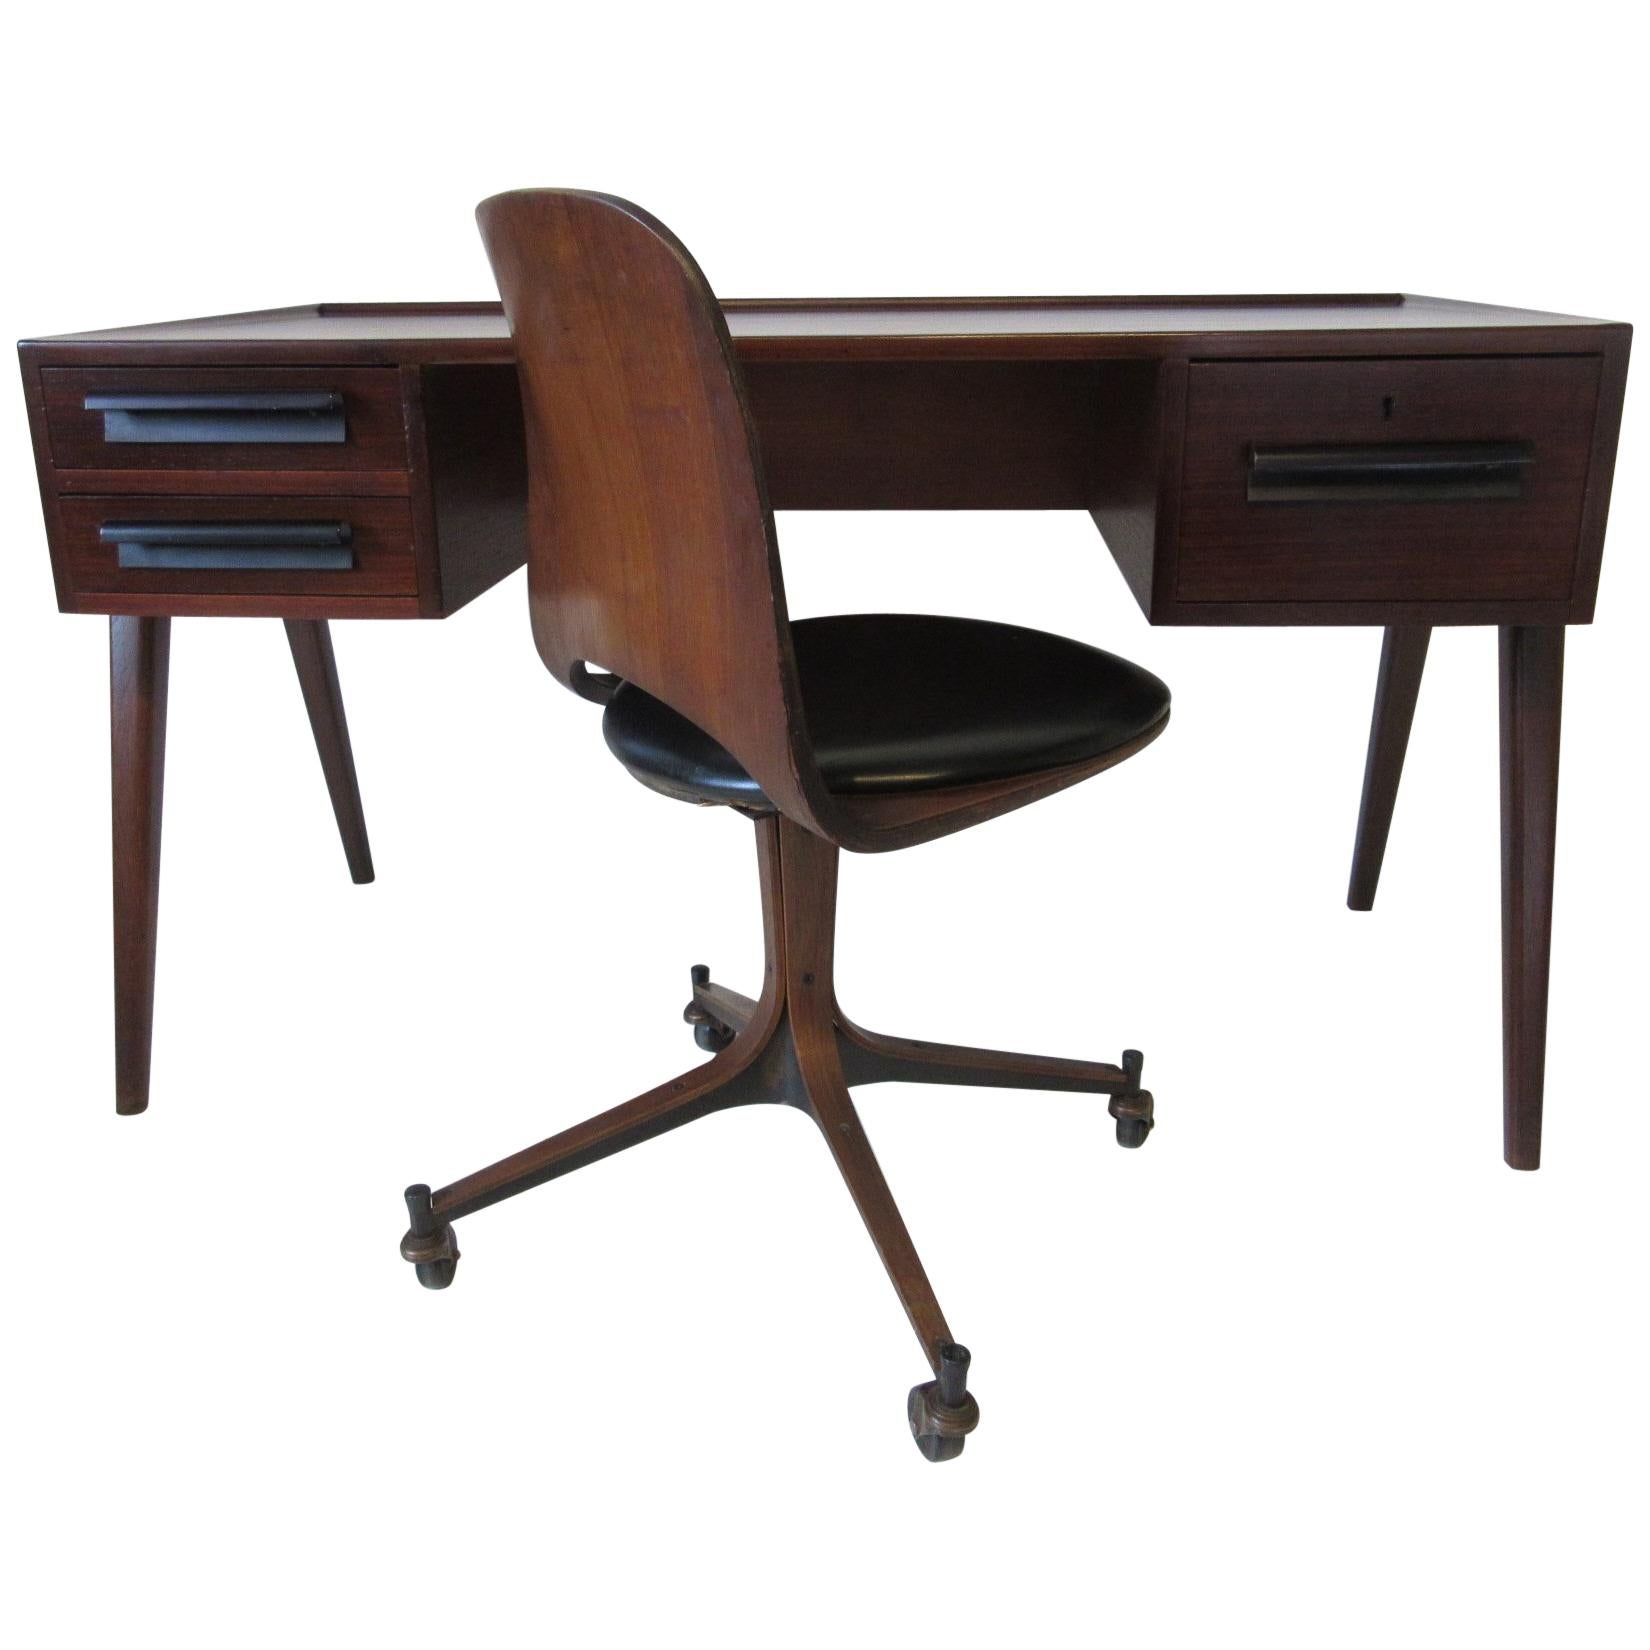 Rare George Mulhauser Plycraft Compass Desk and Chair